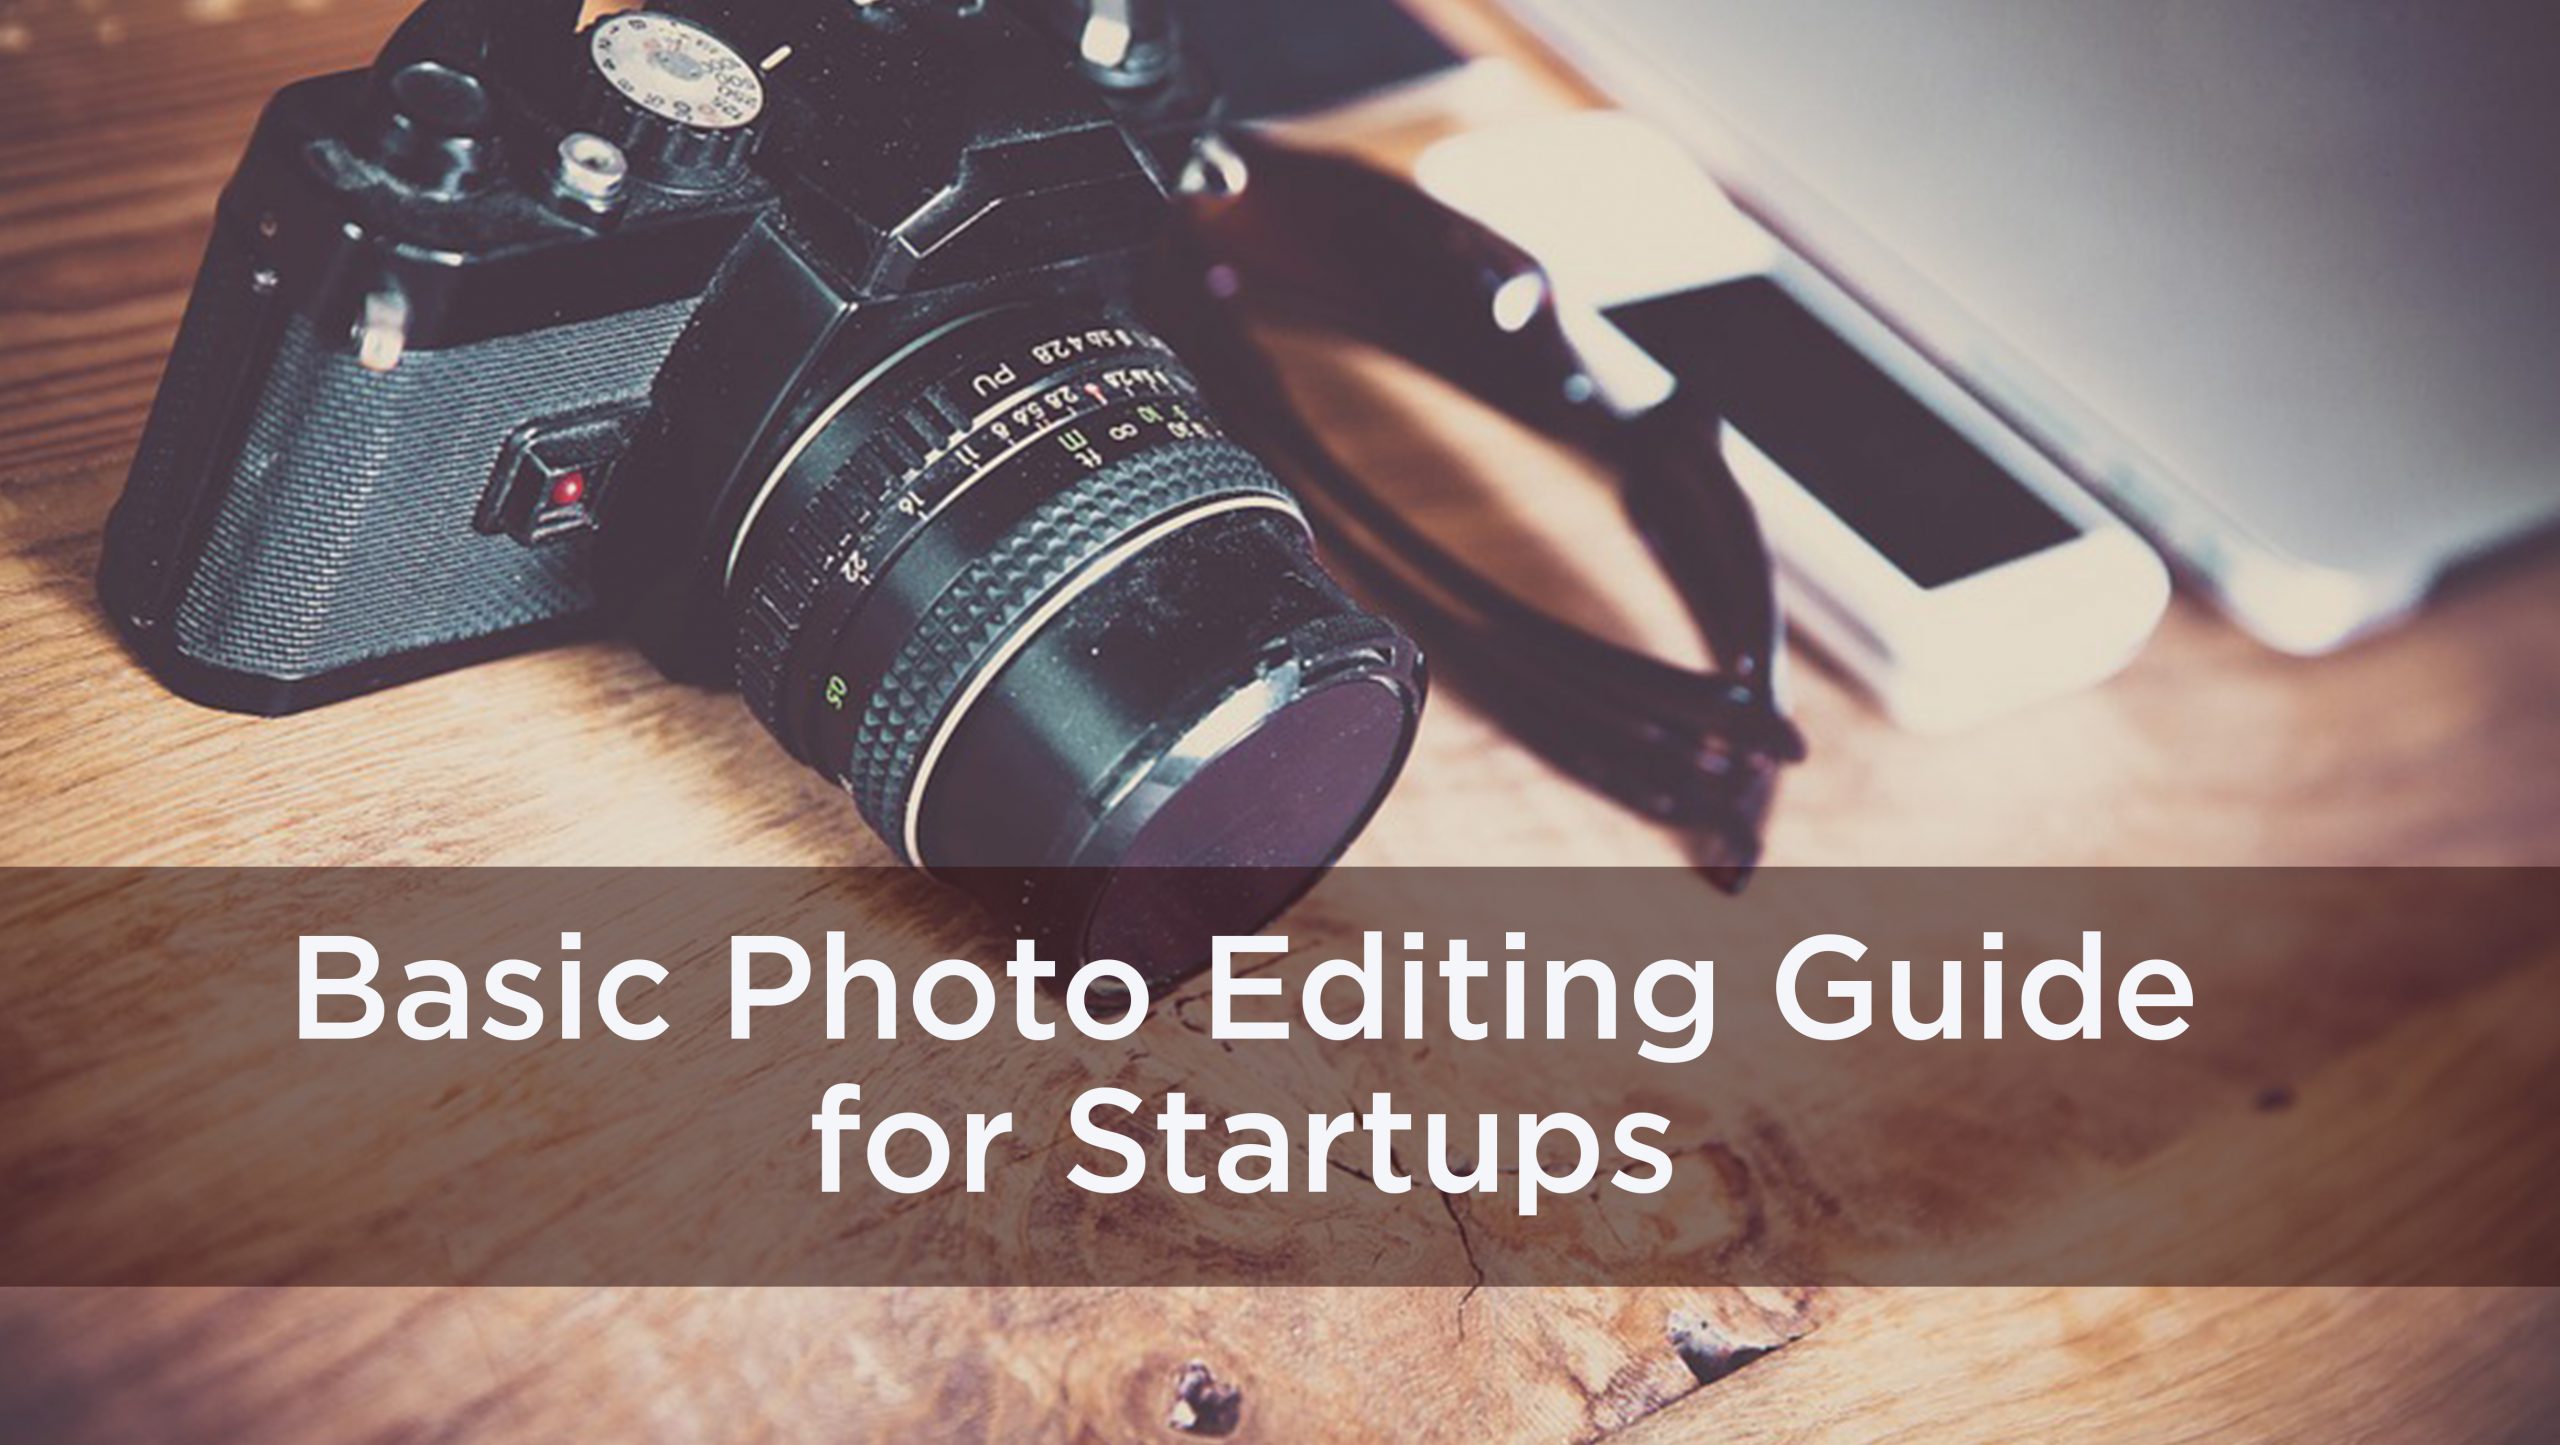 Basic Photo Editing Guide for Startups